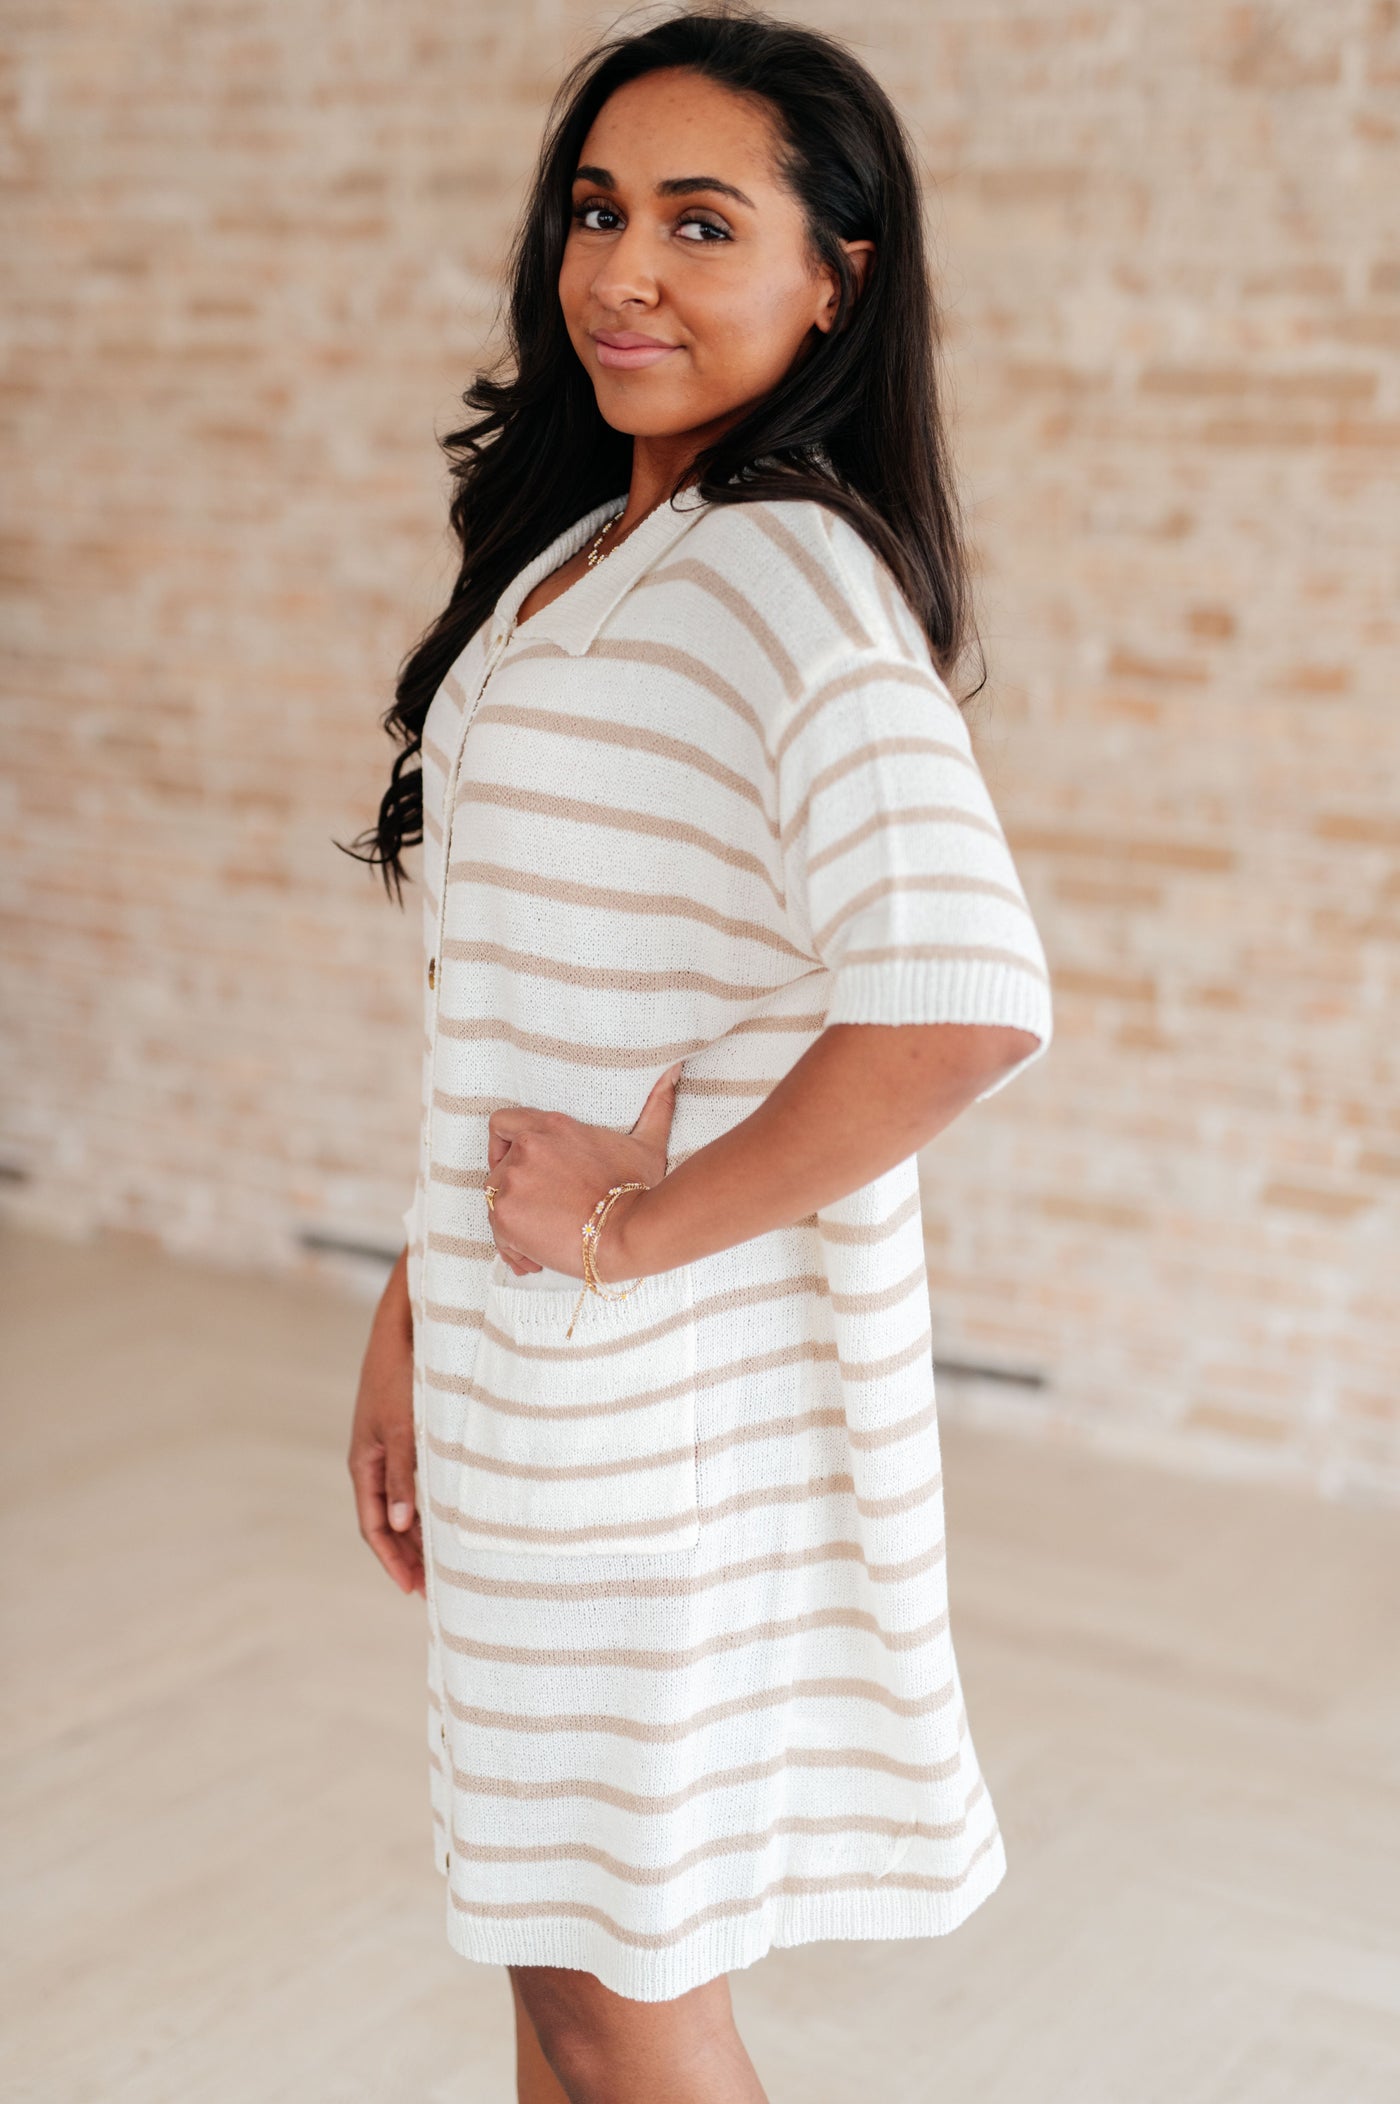 Easy Street Striped Dress Dresses Southern Soul Collectives